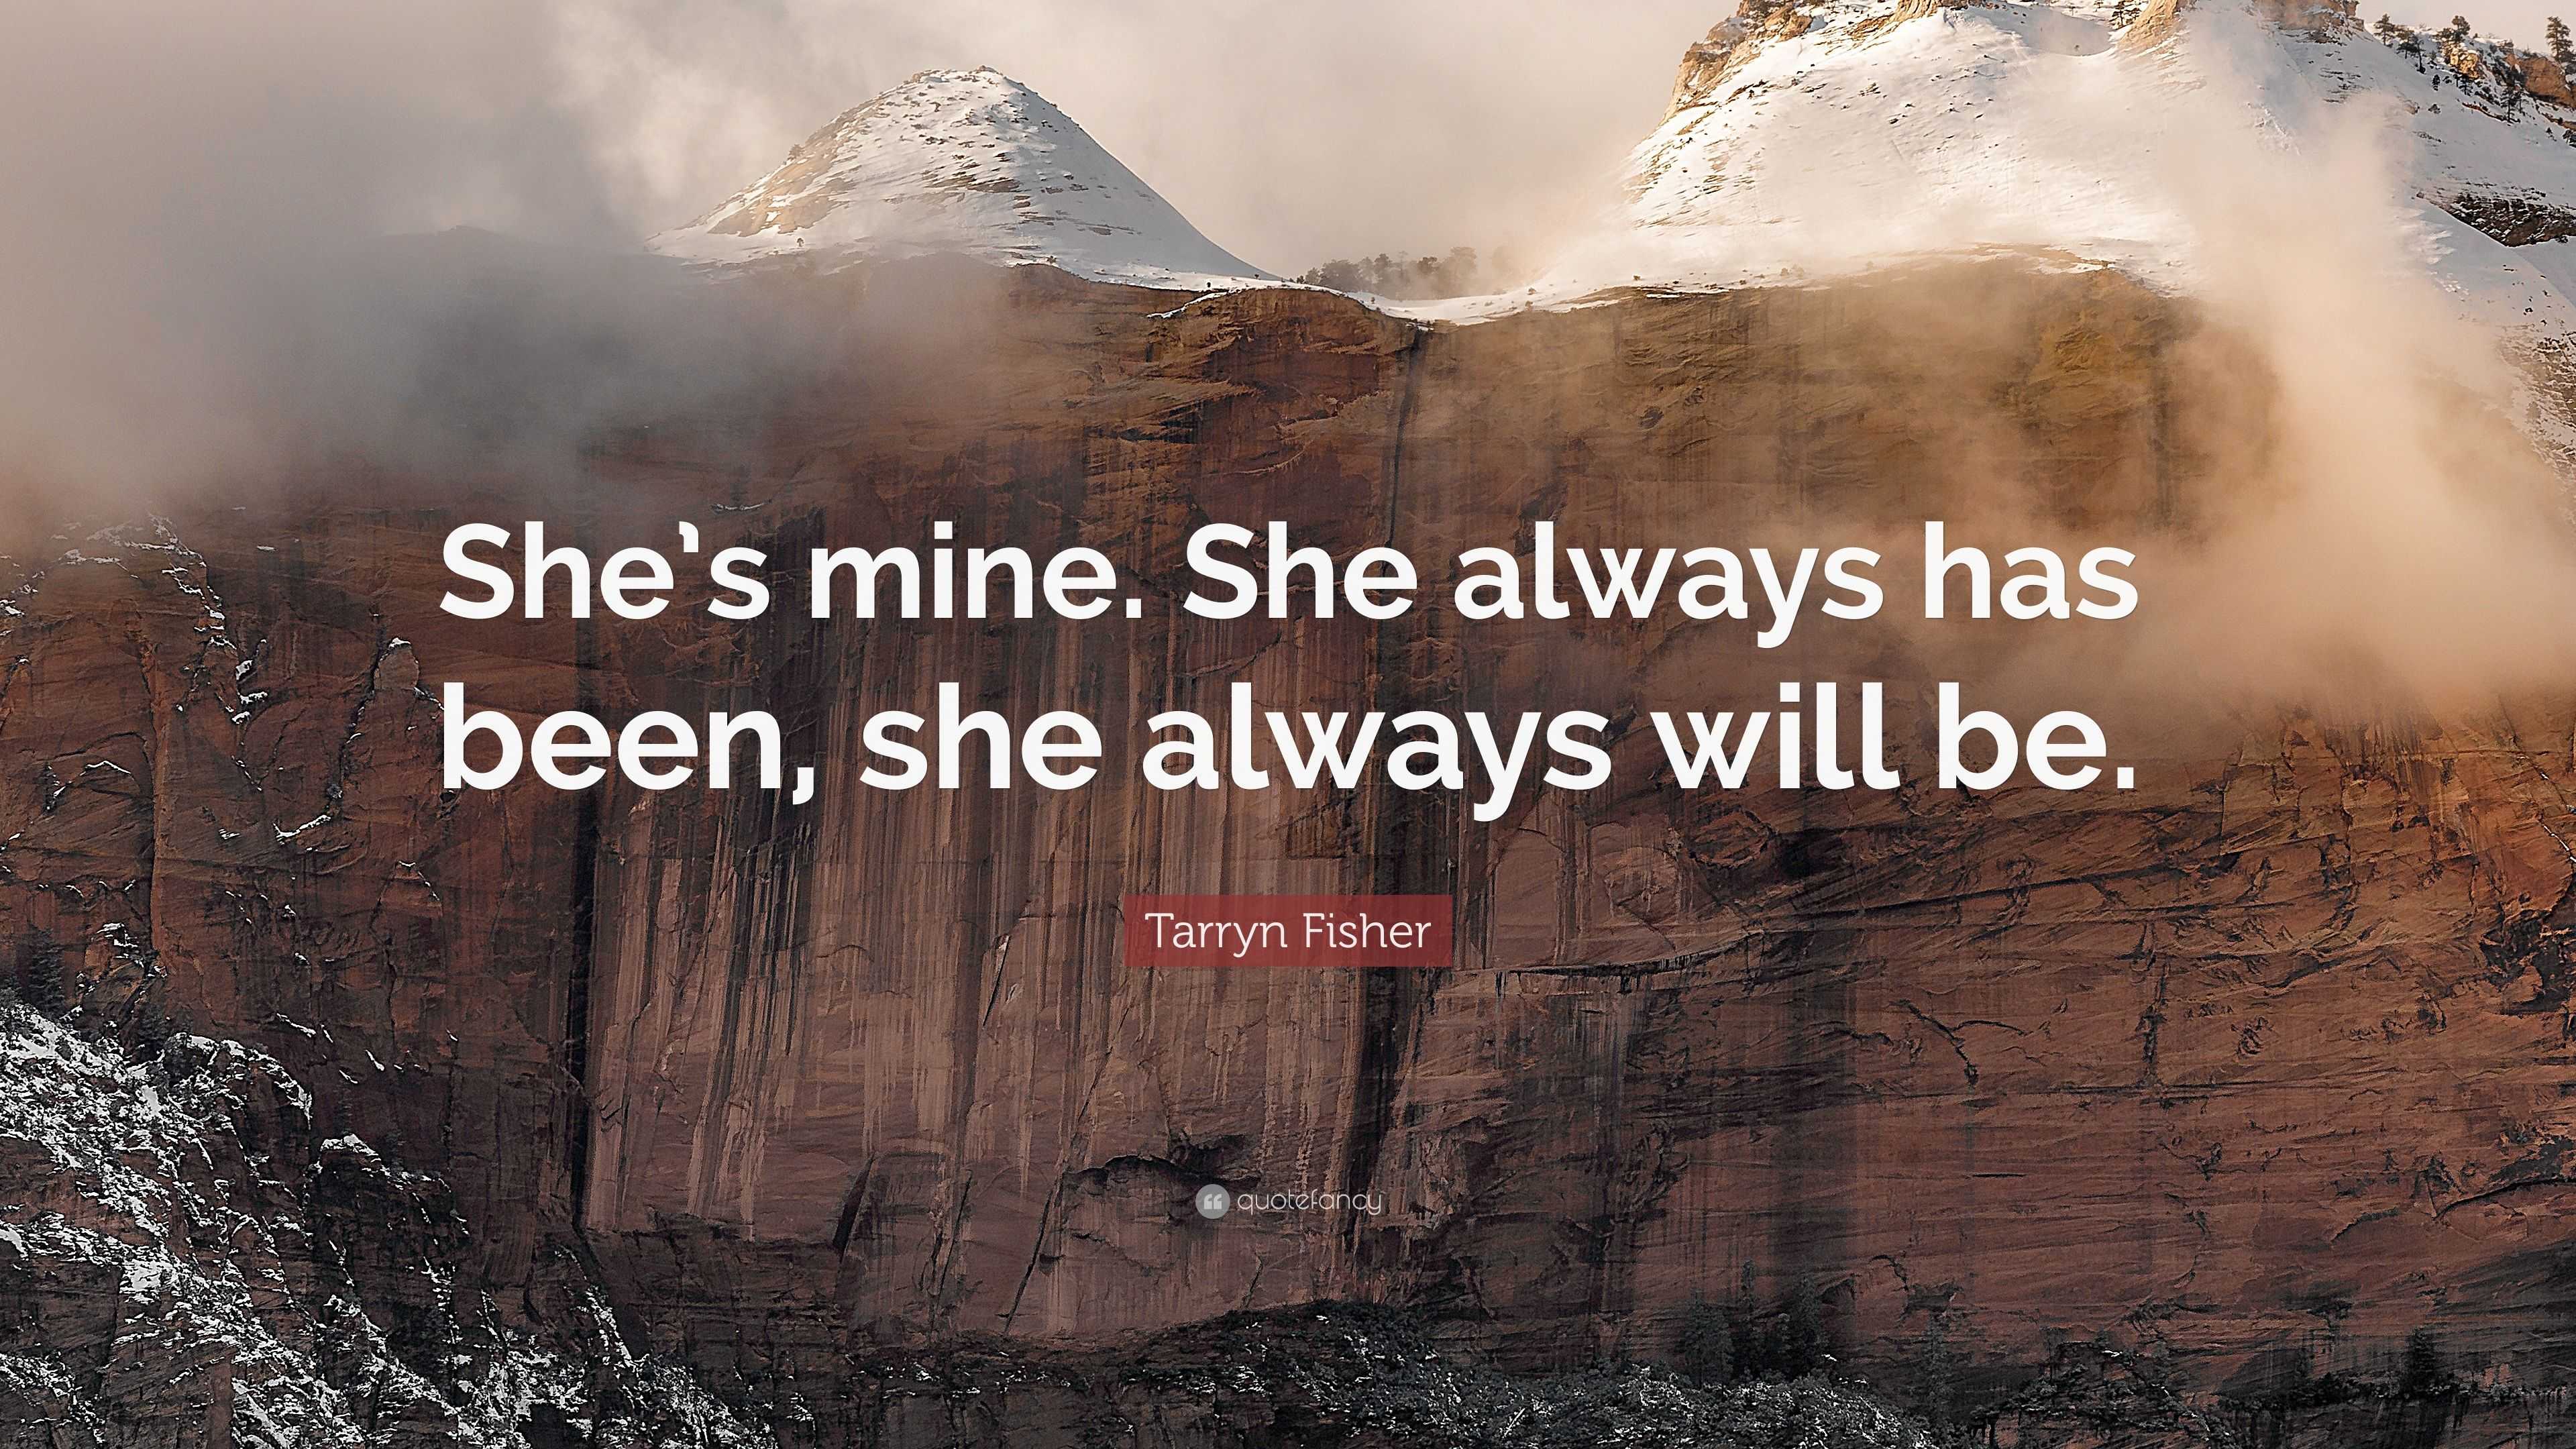 Tarryn Fisher Quote “She s mine She always has been she always will